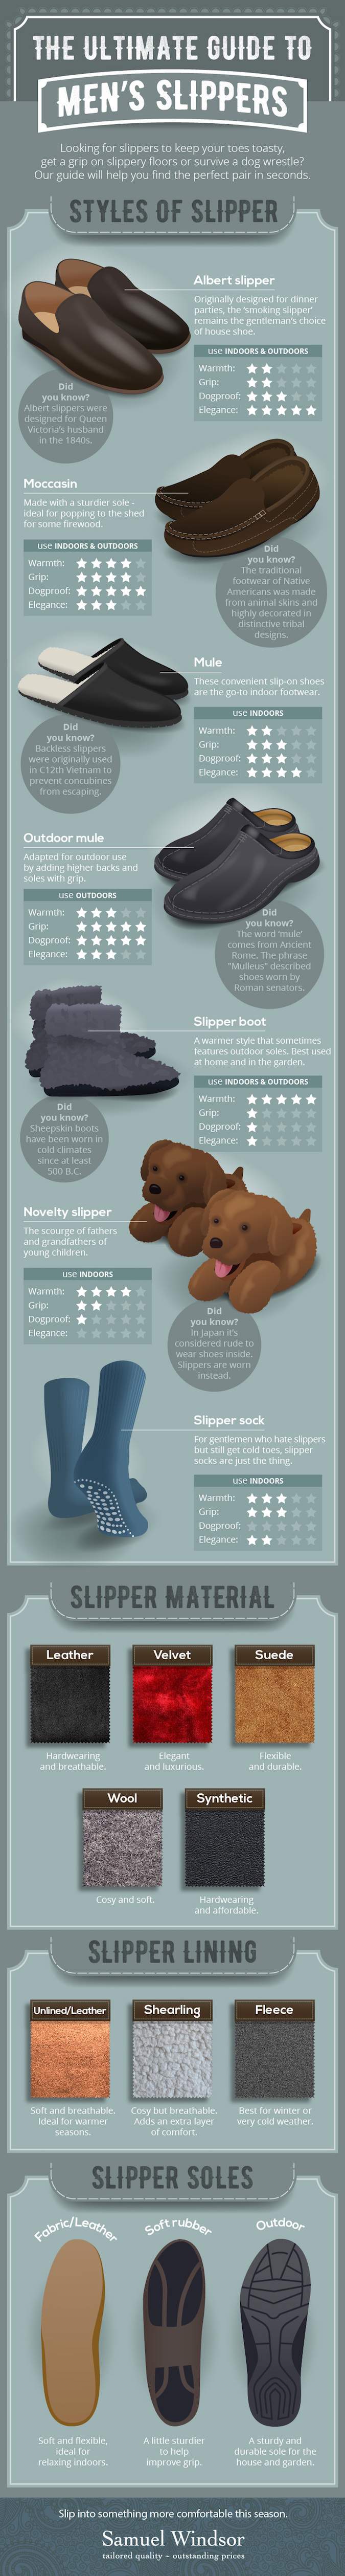 guide to men's slippers